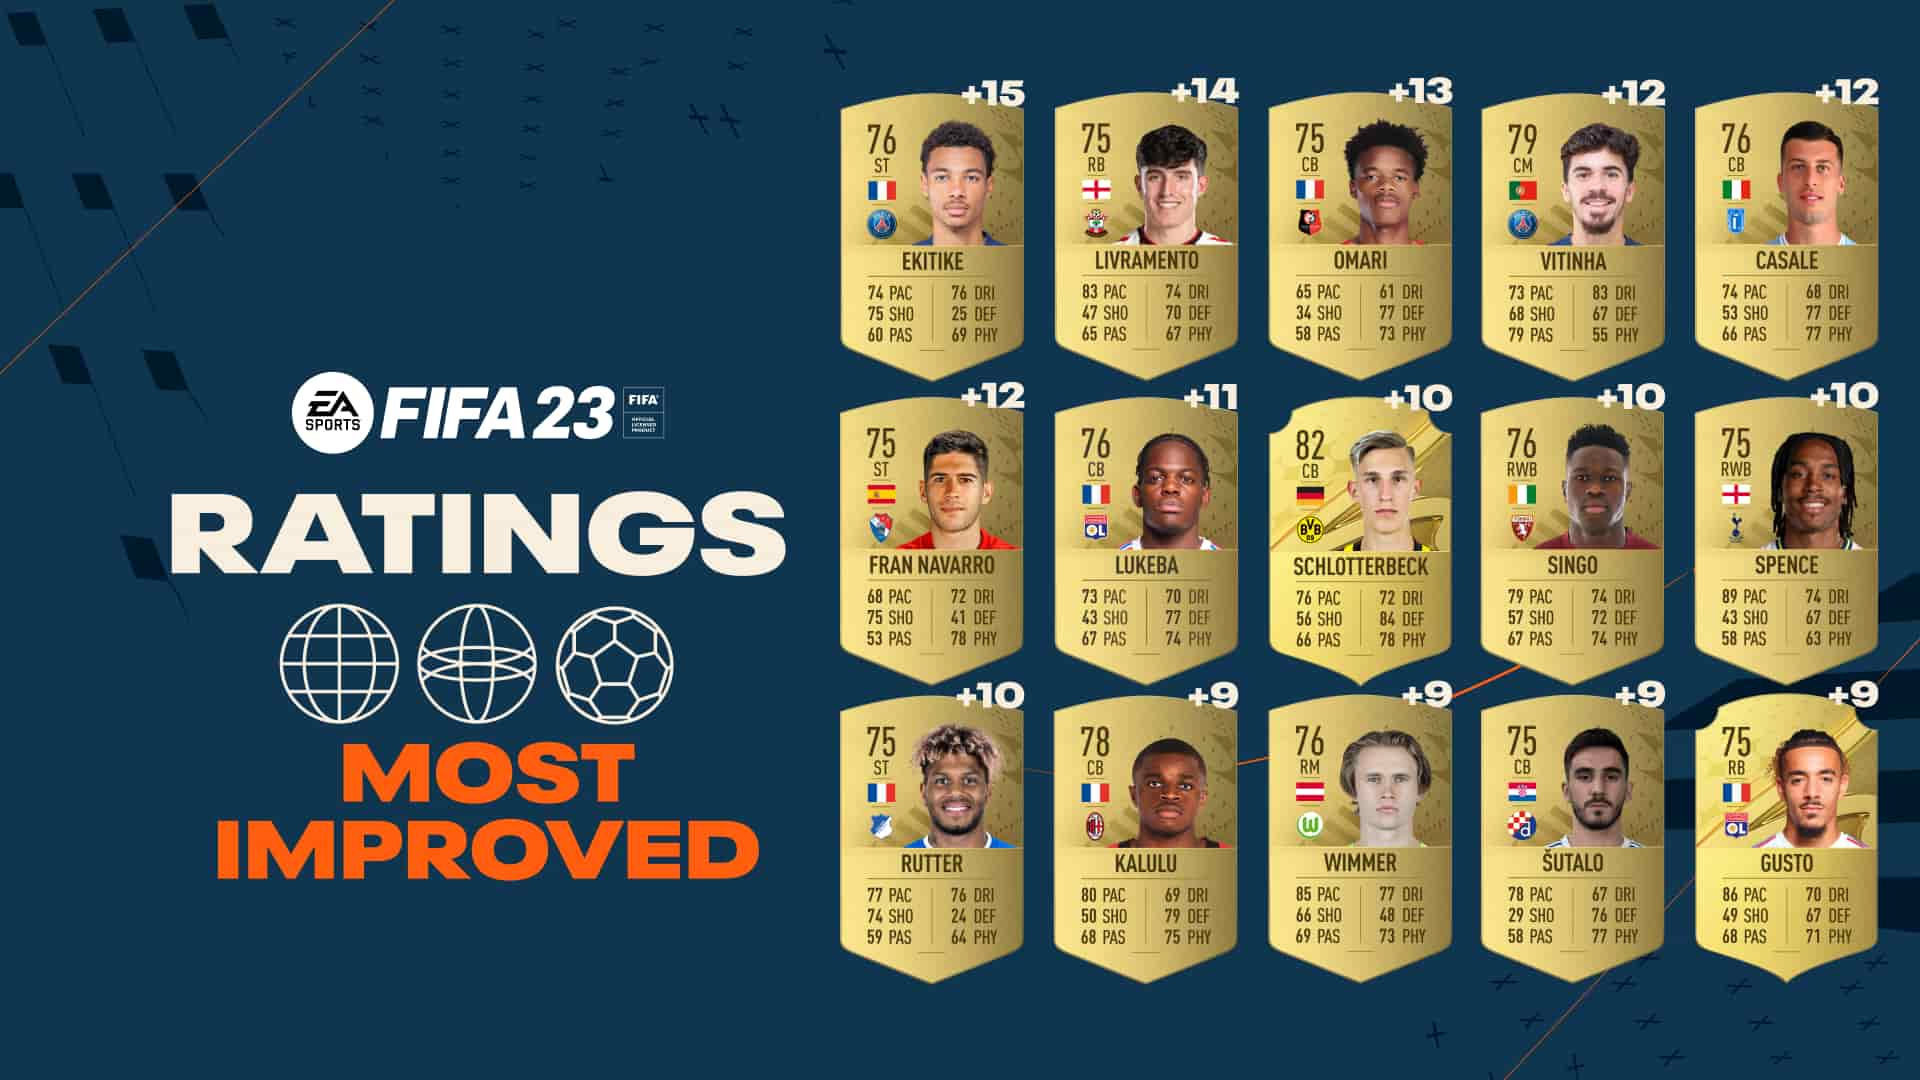 FIFA 23 Most Improved Ratings